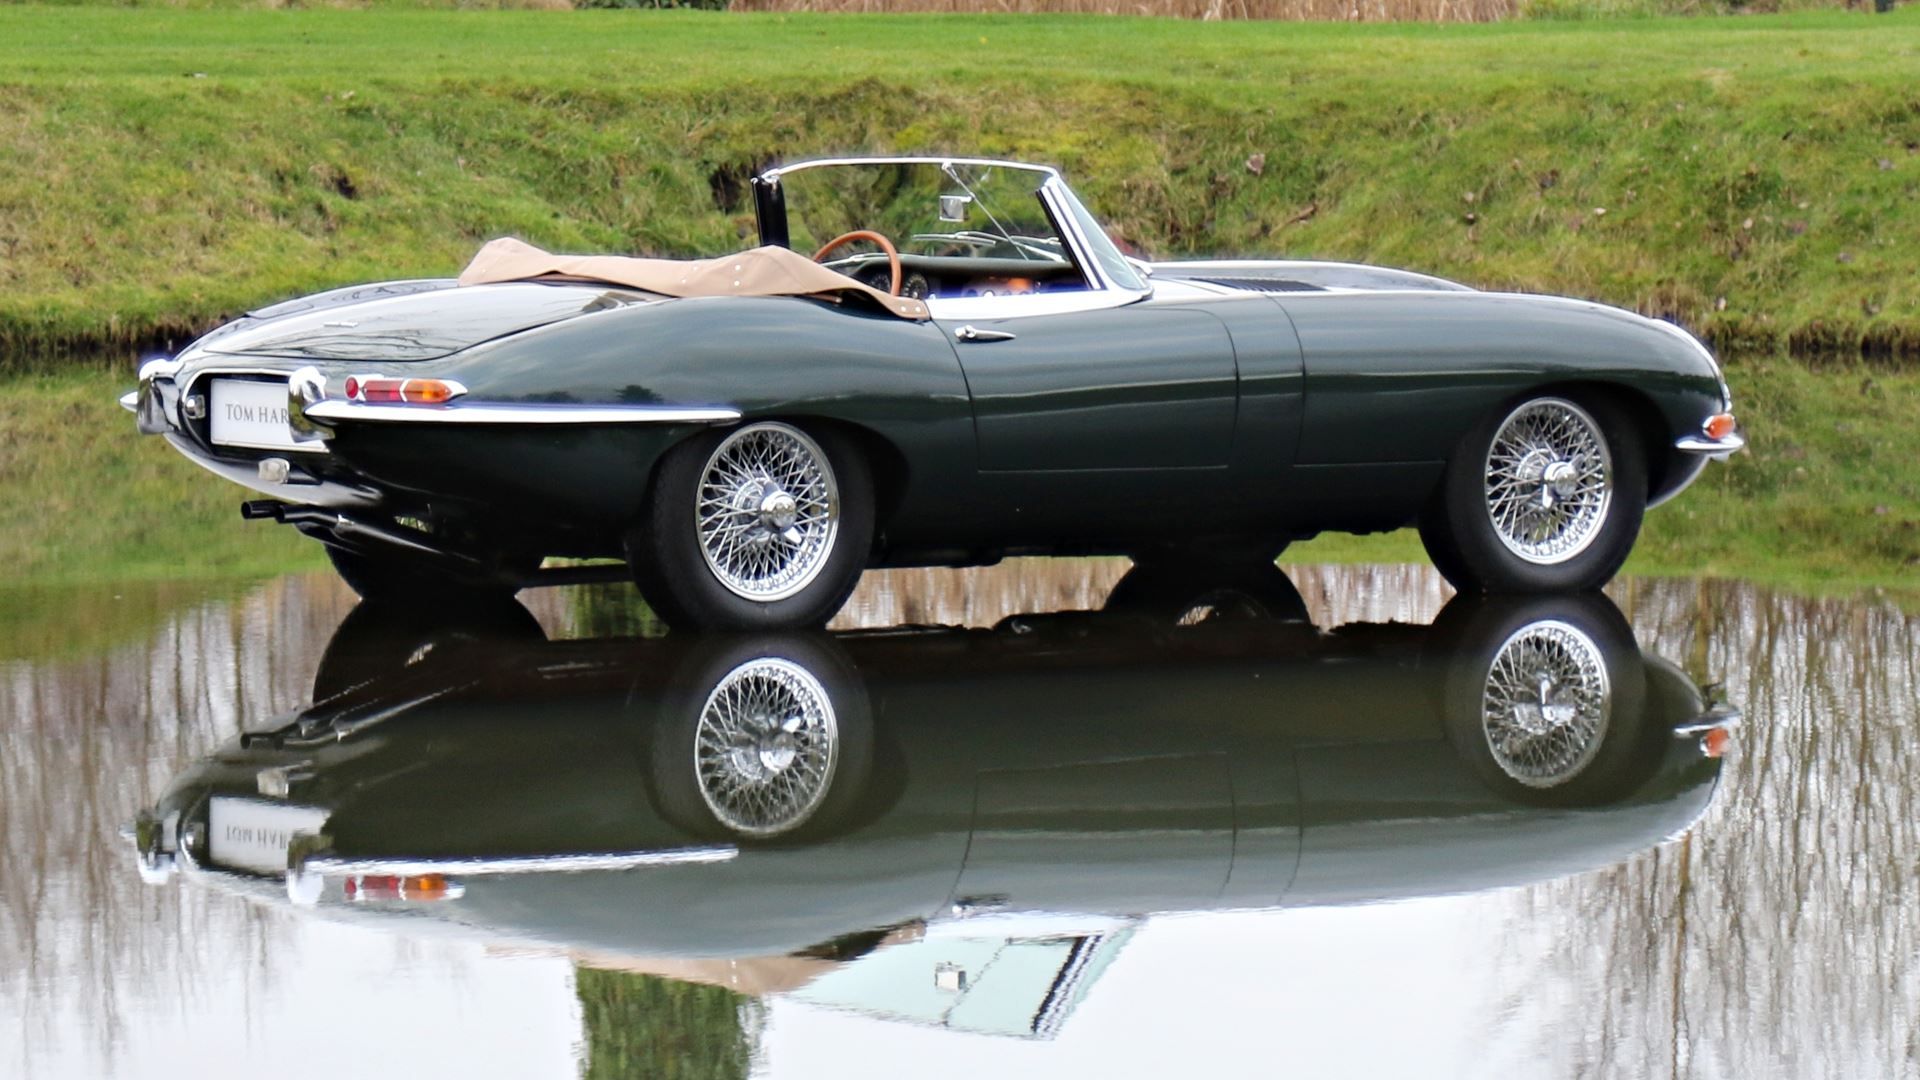 Jaguar E-Type parked on top of a lake